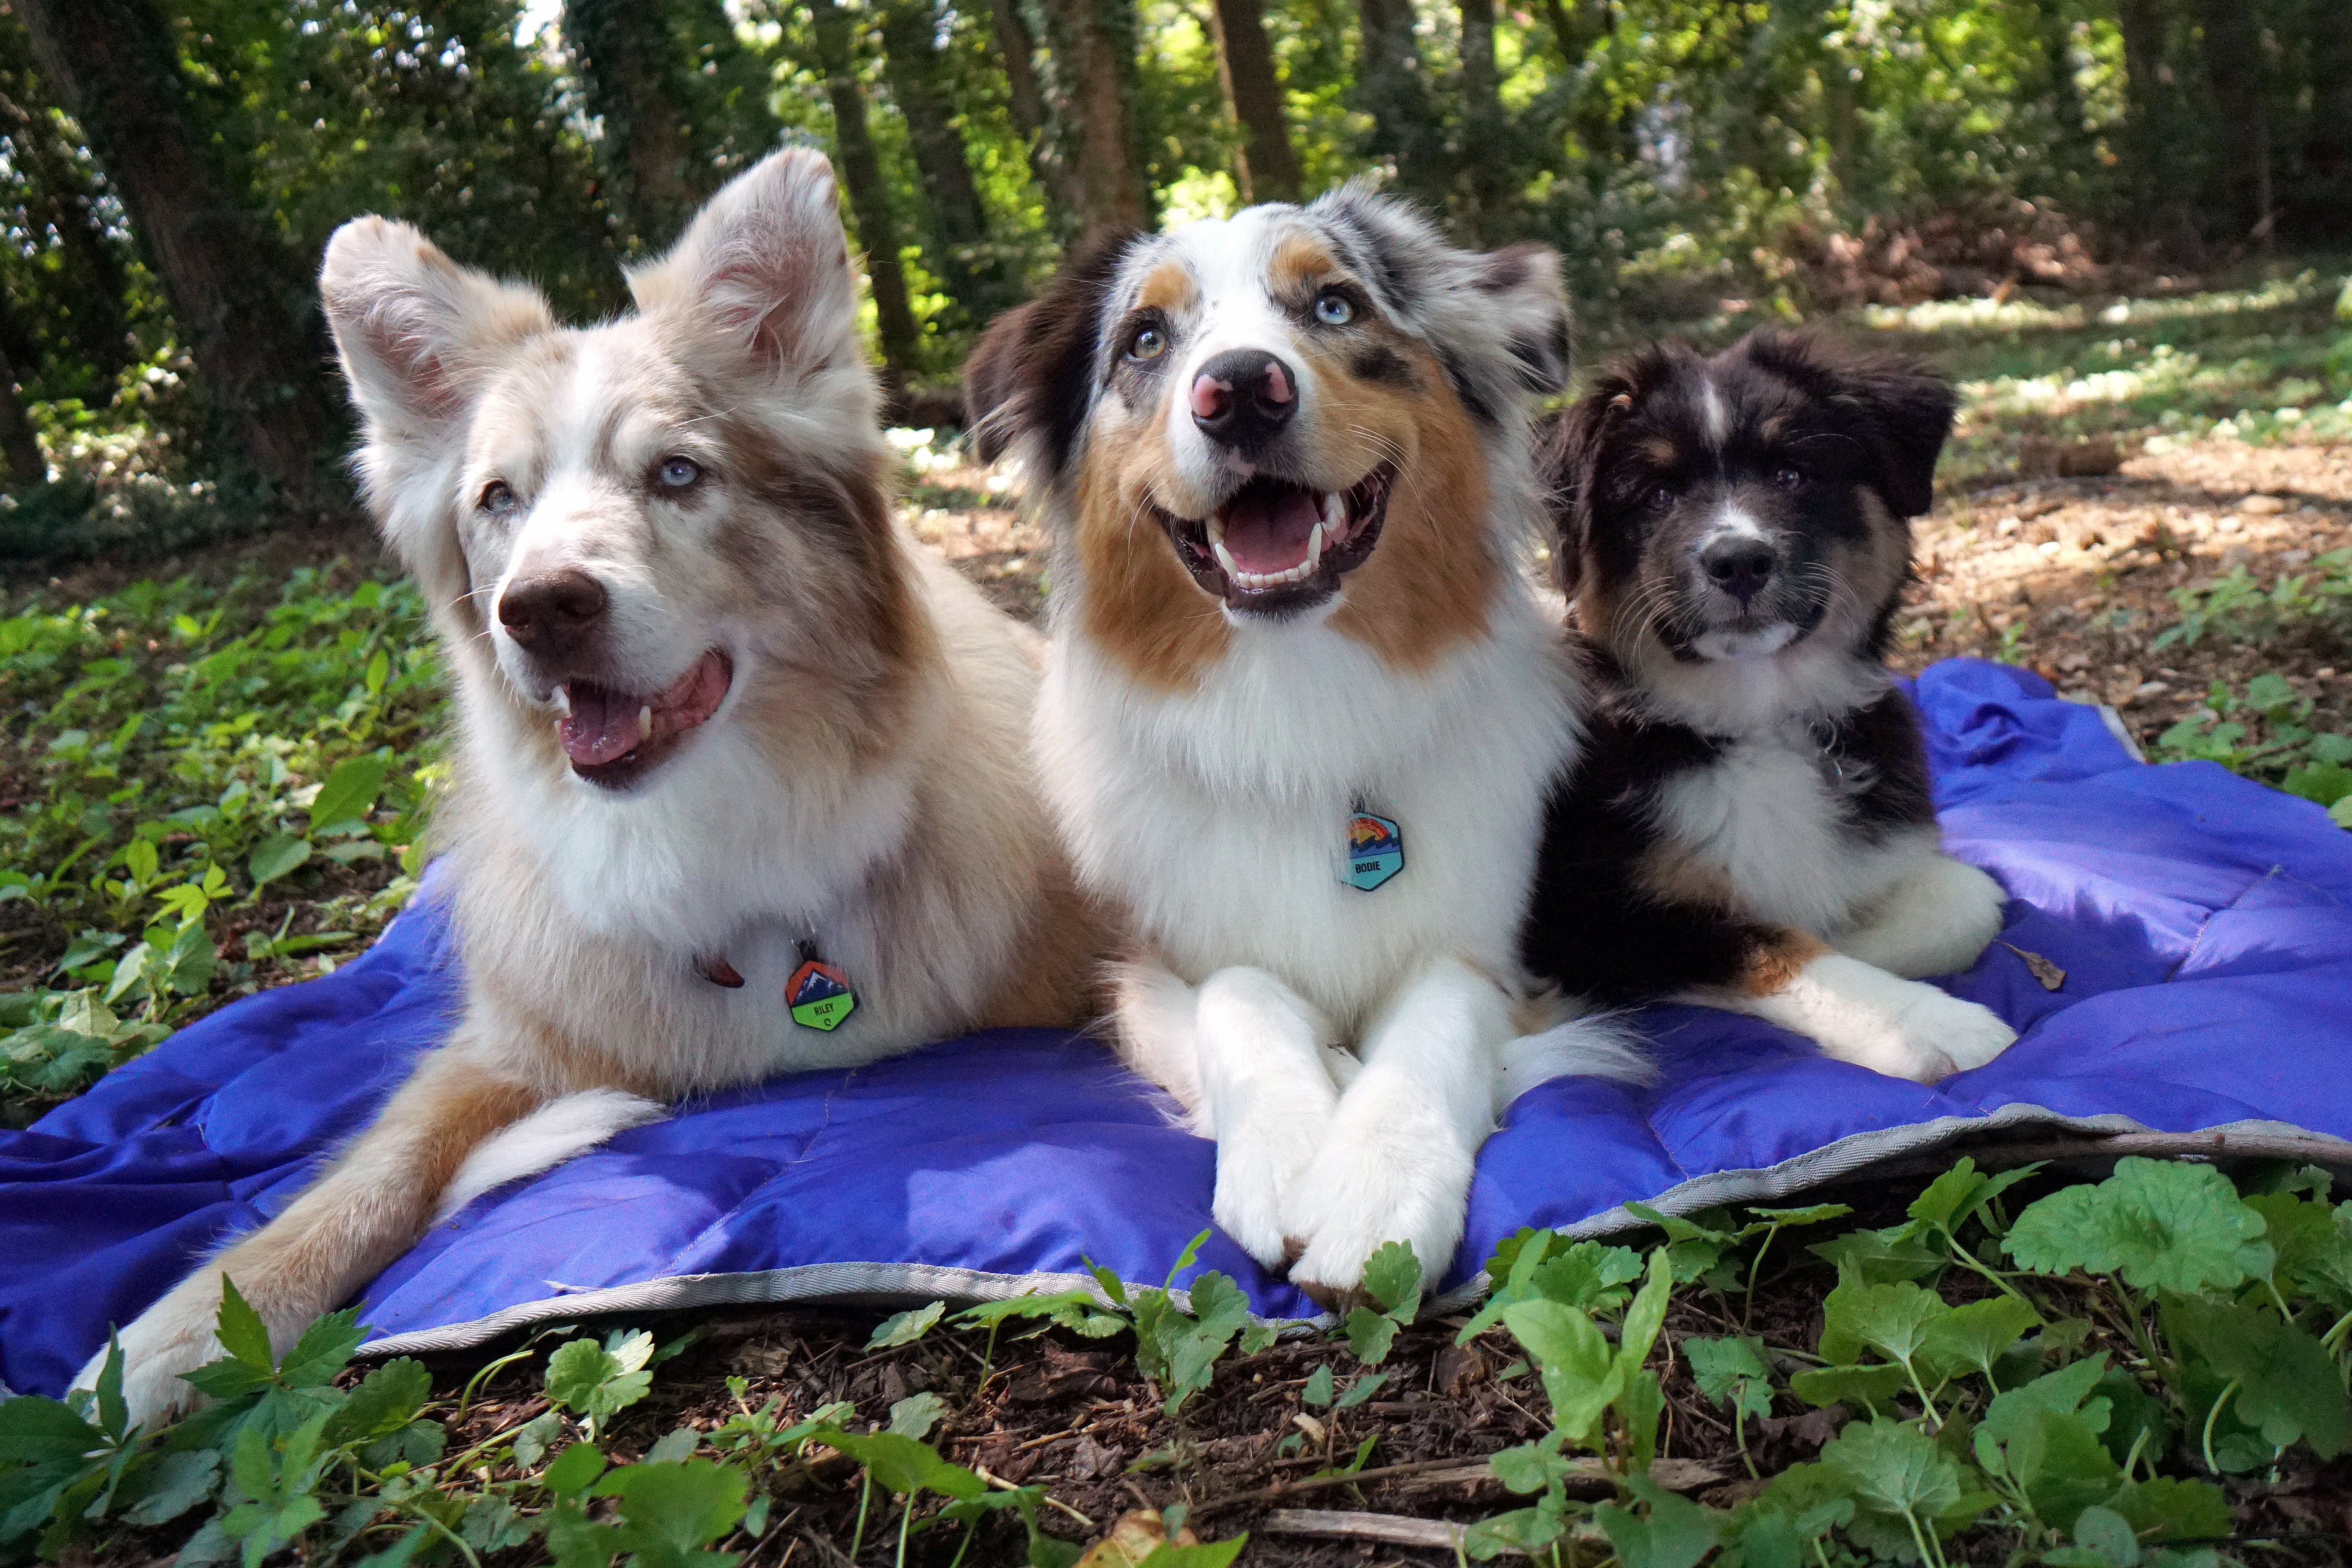 Maria's dogs sitting on Clear Lake Blanket in the woods.